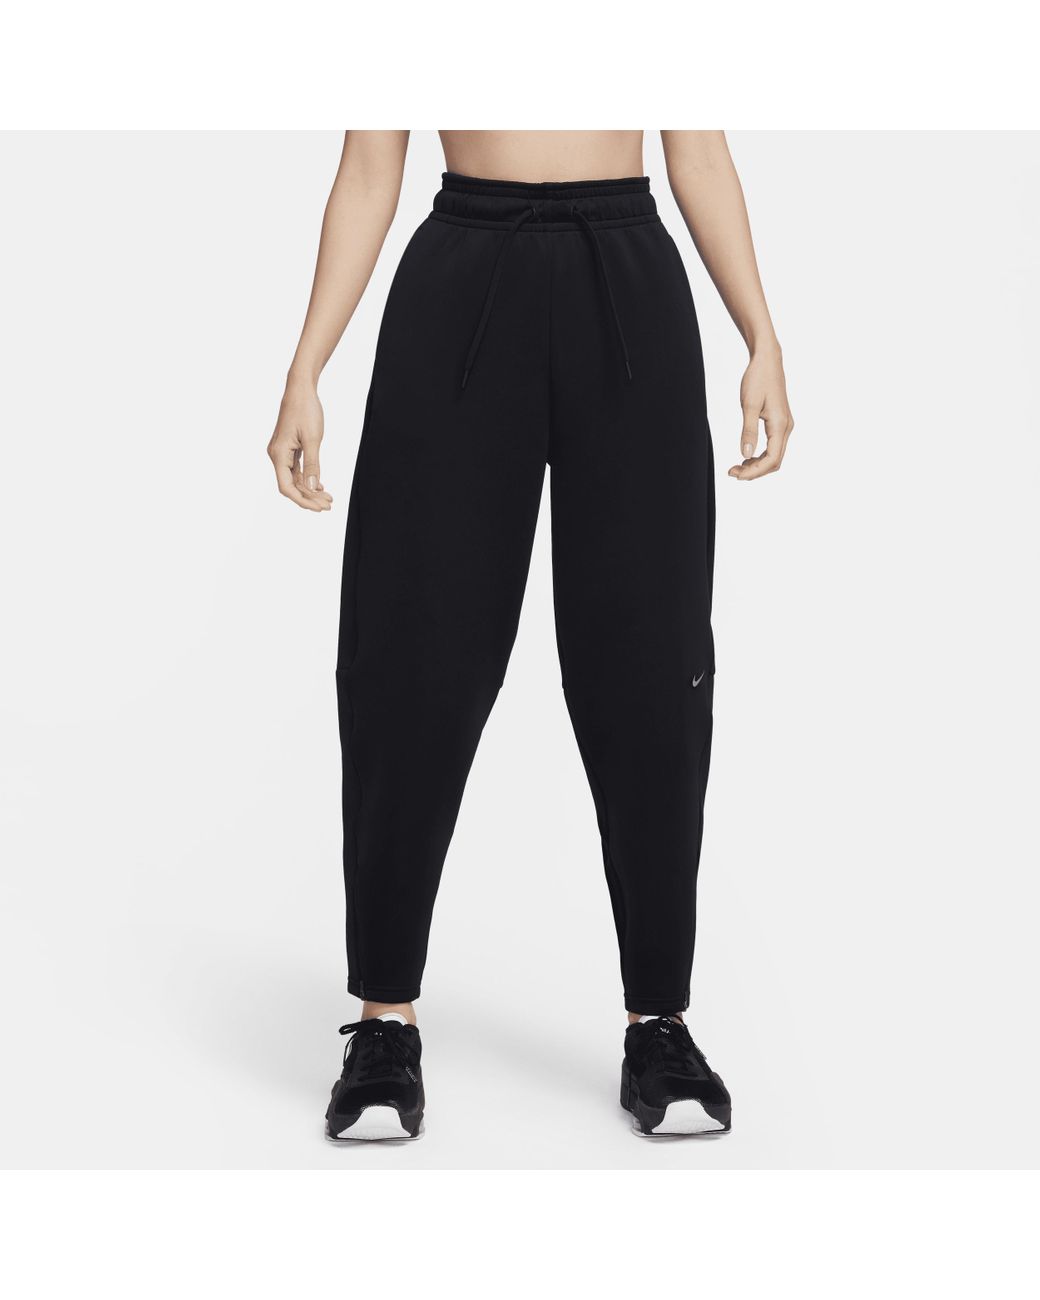 Nike Dri-fit Prima High-waisted 7/8 Training Pants in Black